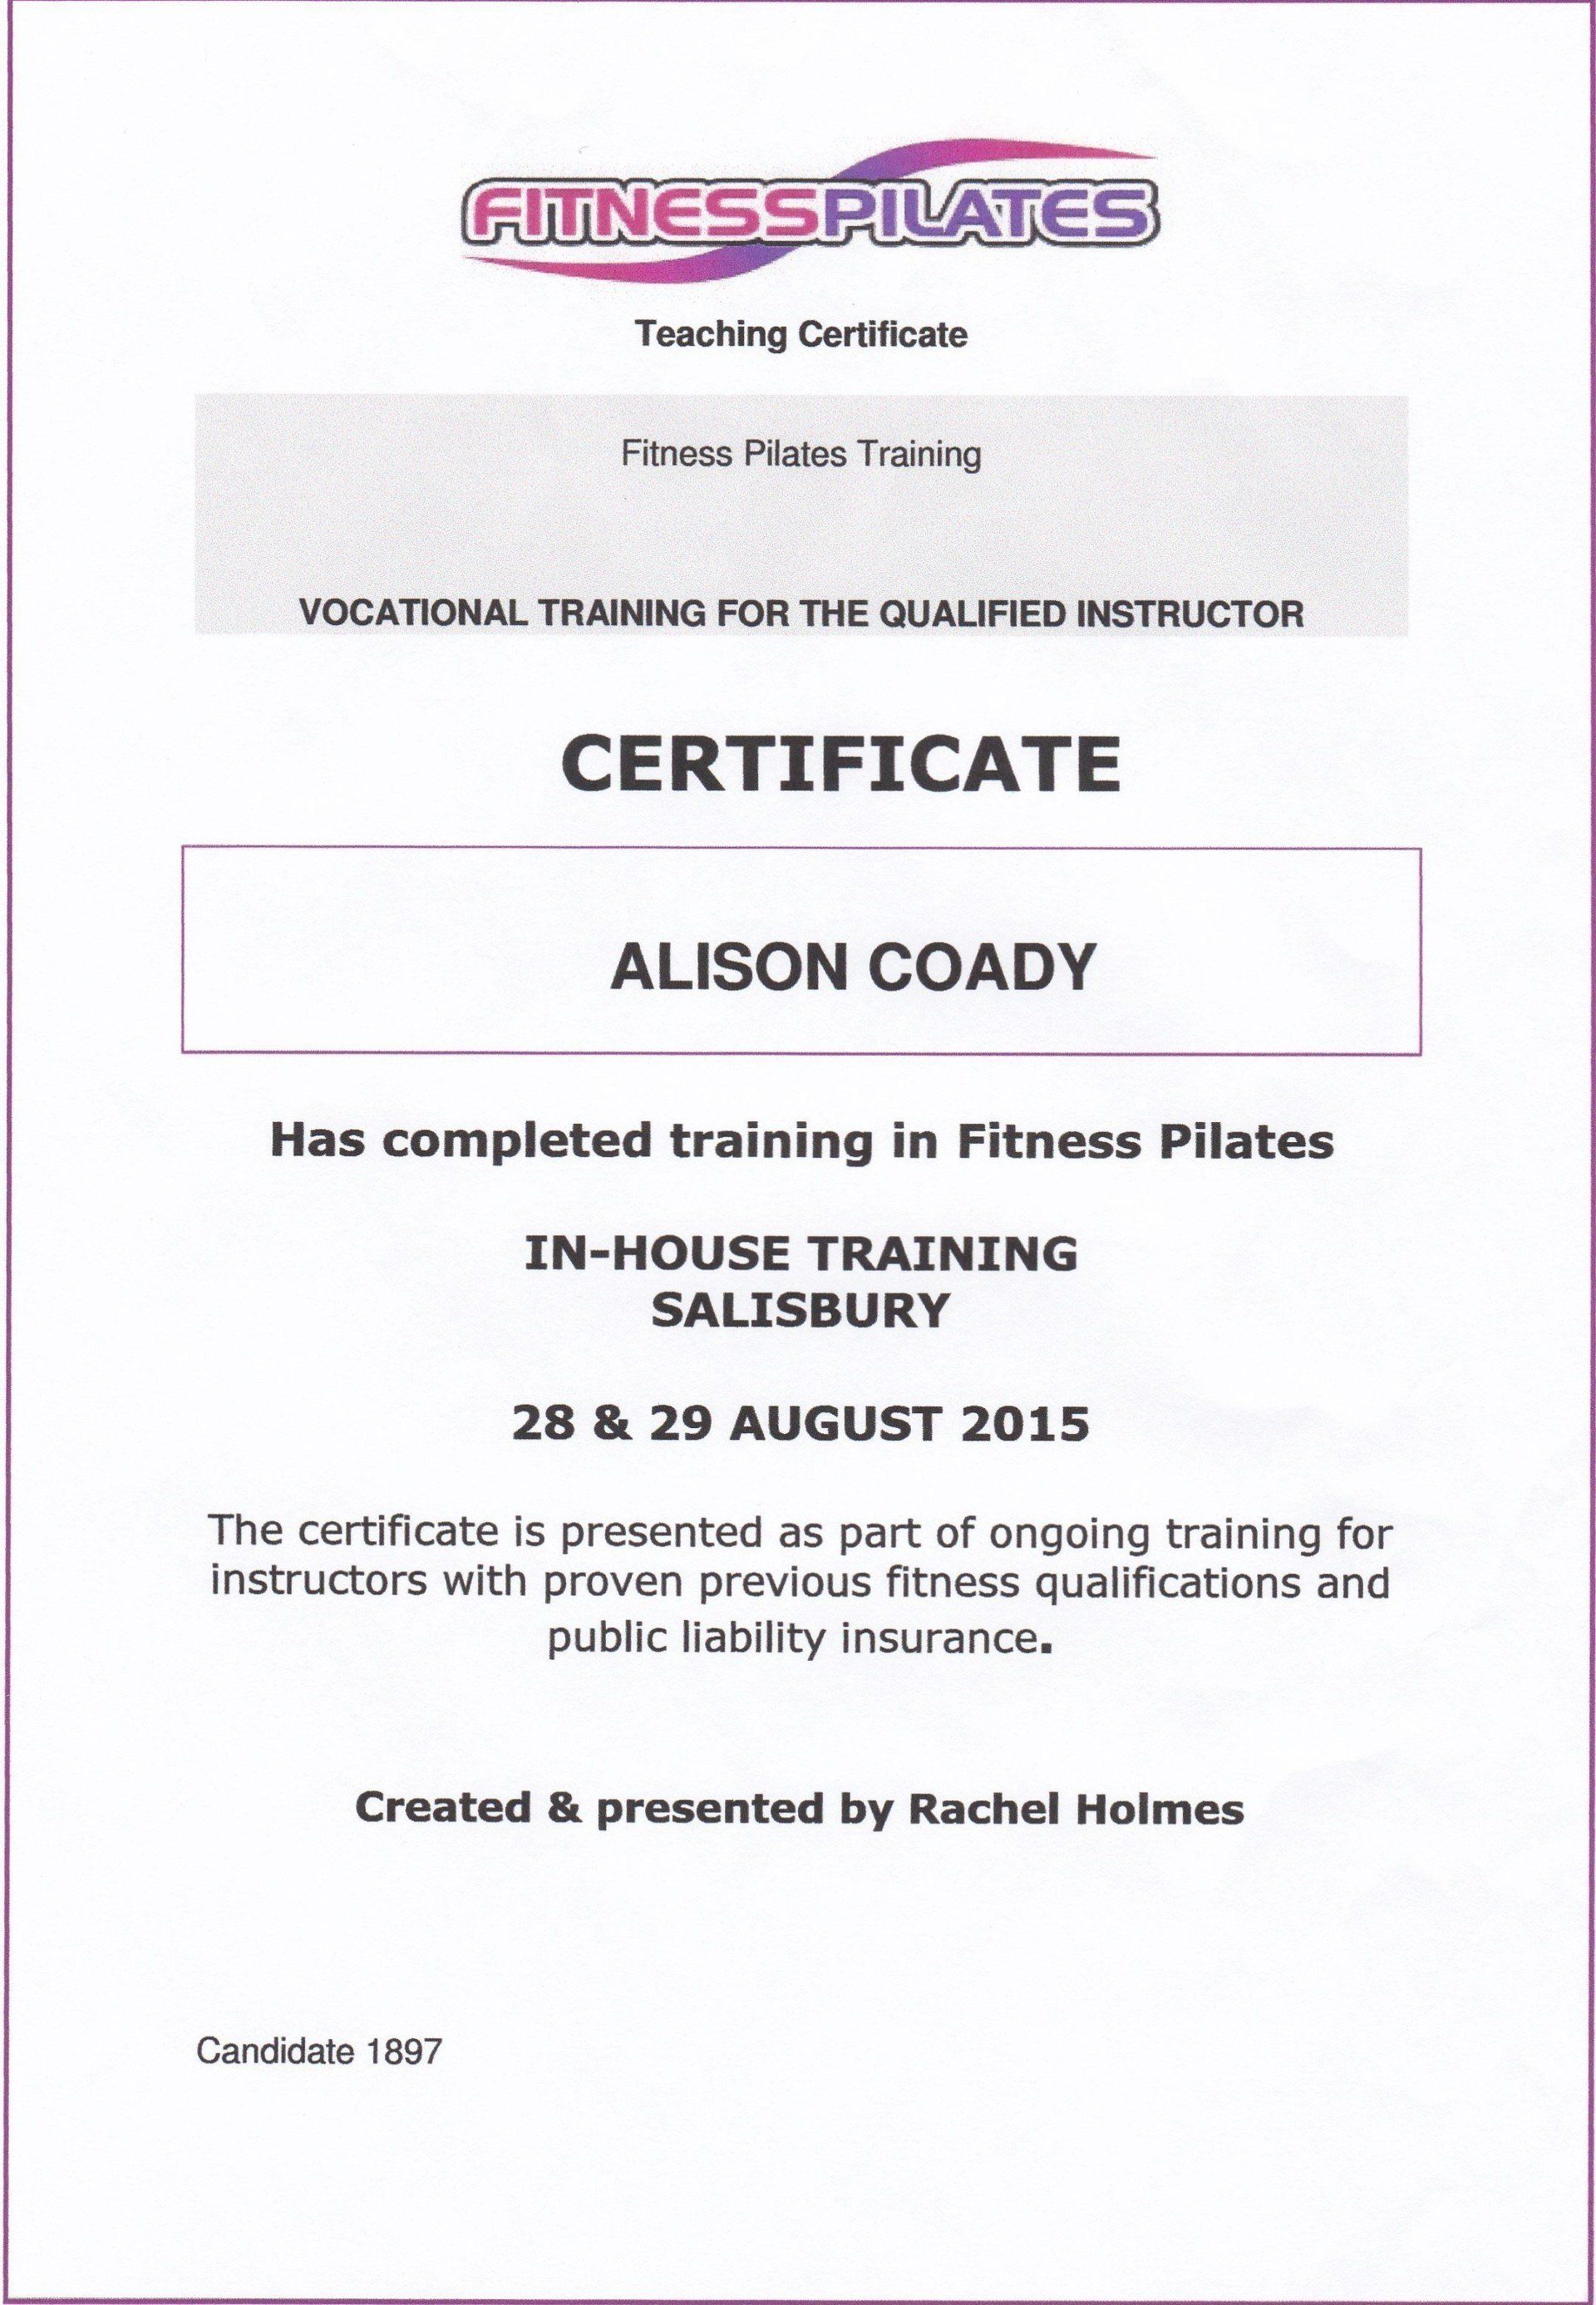 Fitness Pilates In-House Training Certification - 28th August 2015